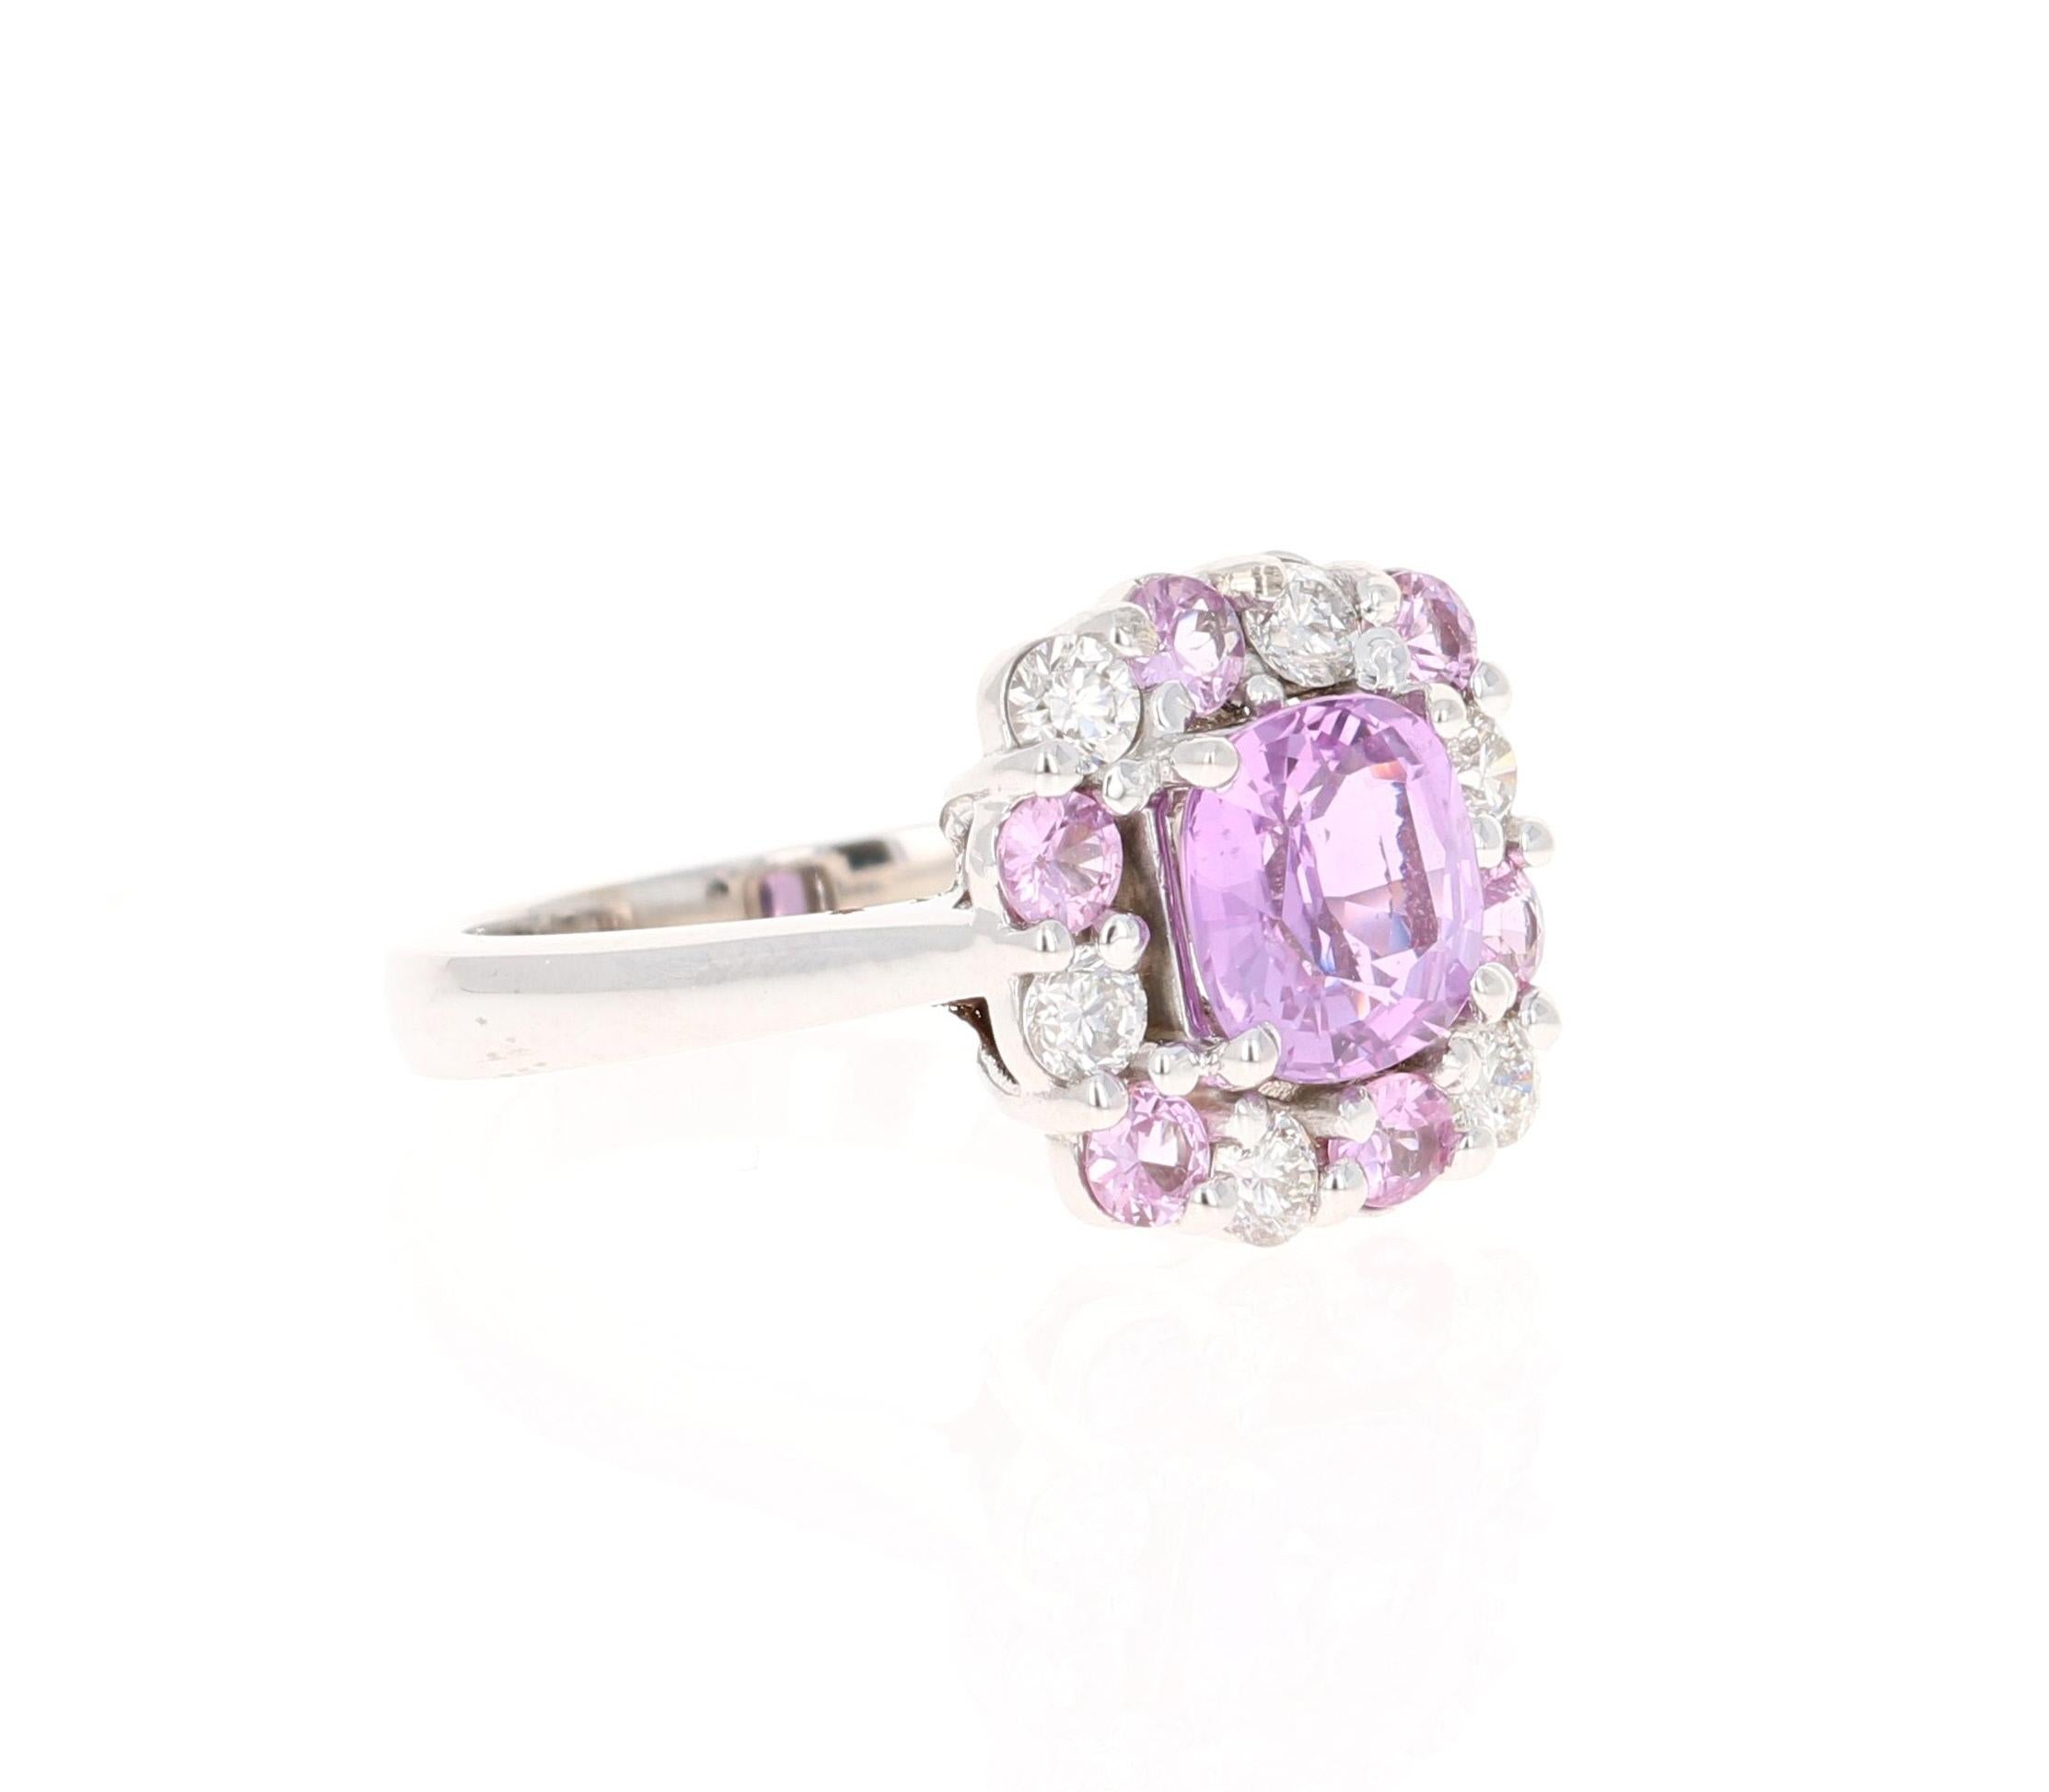 Contemporary GIA Certified 3.09 Carat Pink Sapphire Diamond White Gold Engagement Ring For Sale